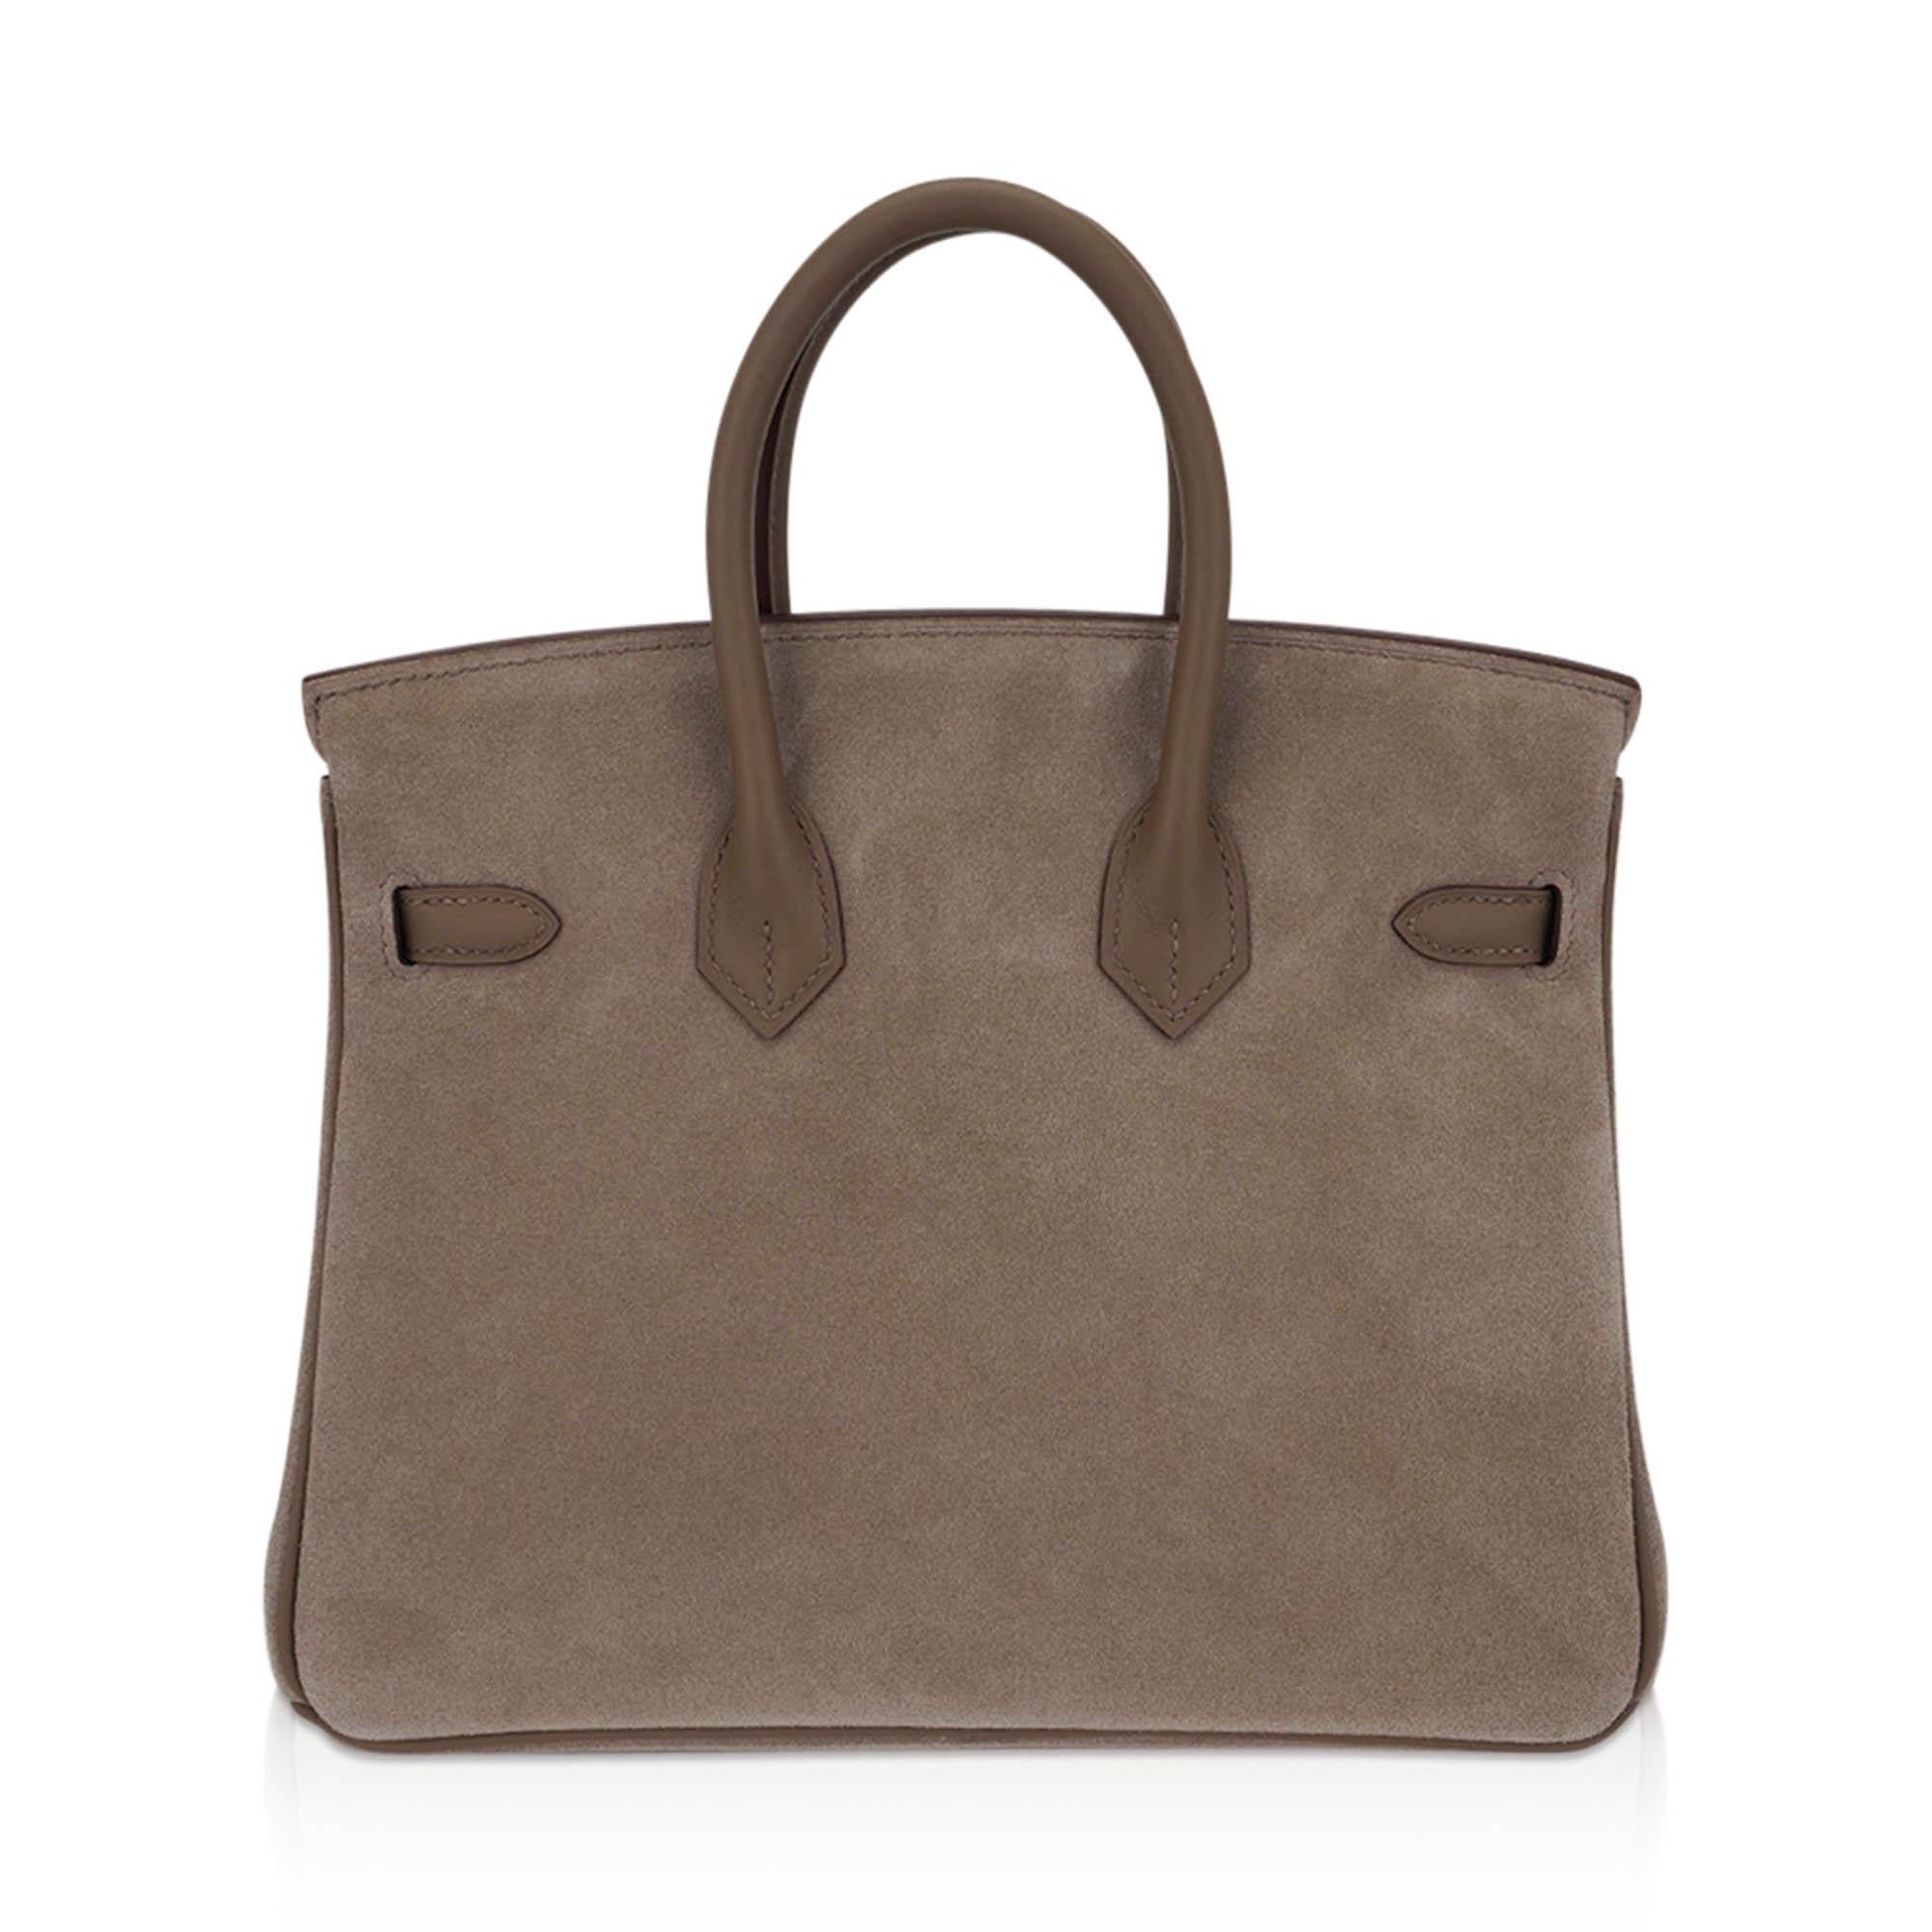 Hermes Birkin 25 Limited Edition Grizzly Gris Caillou Etoupe Swift Leather Bag For Sale 1